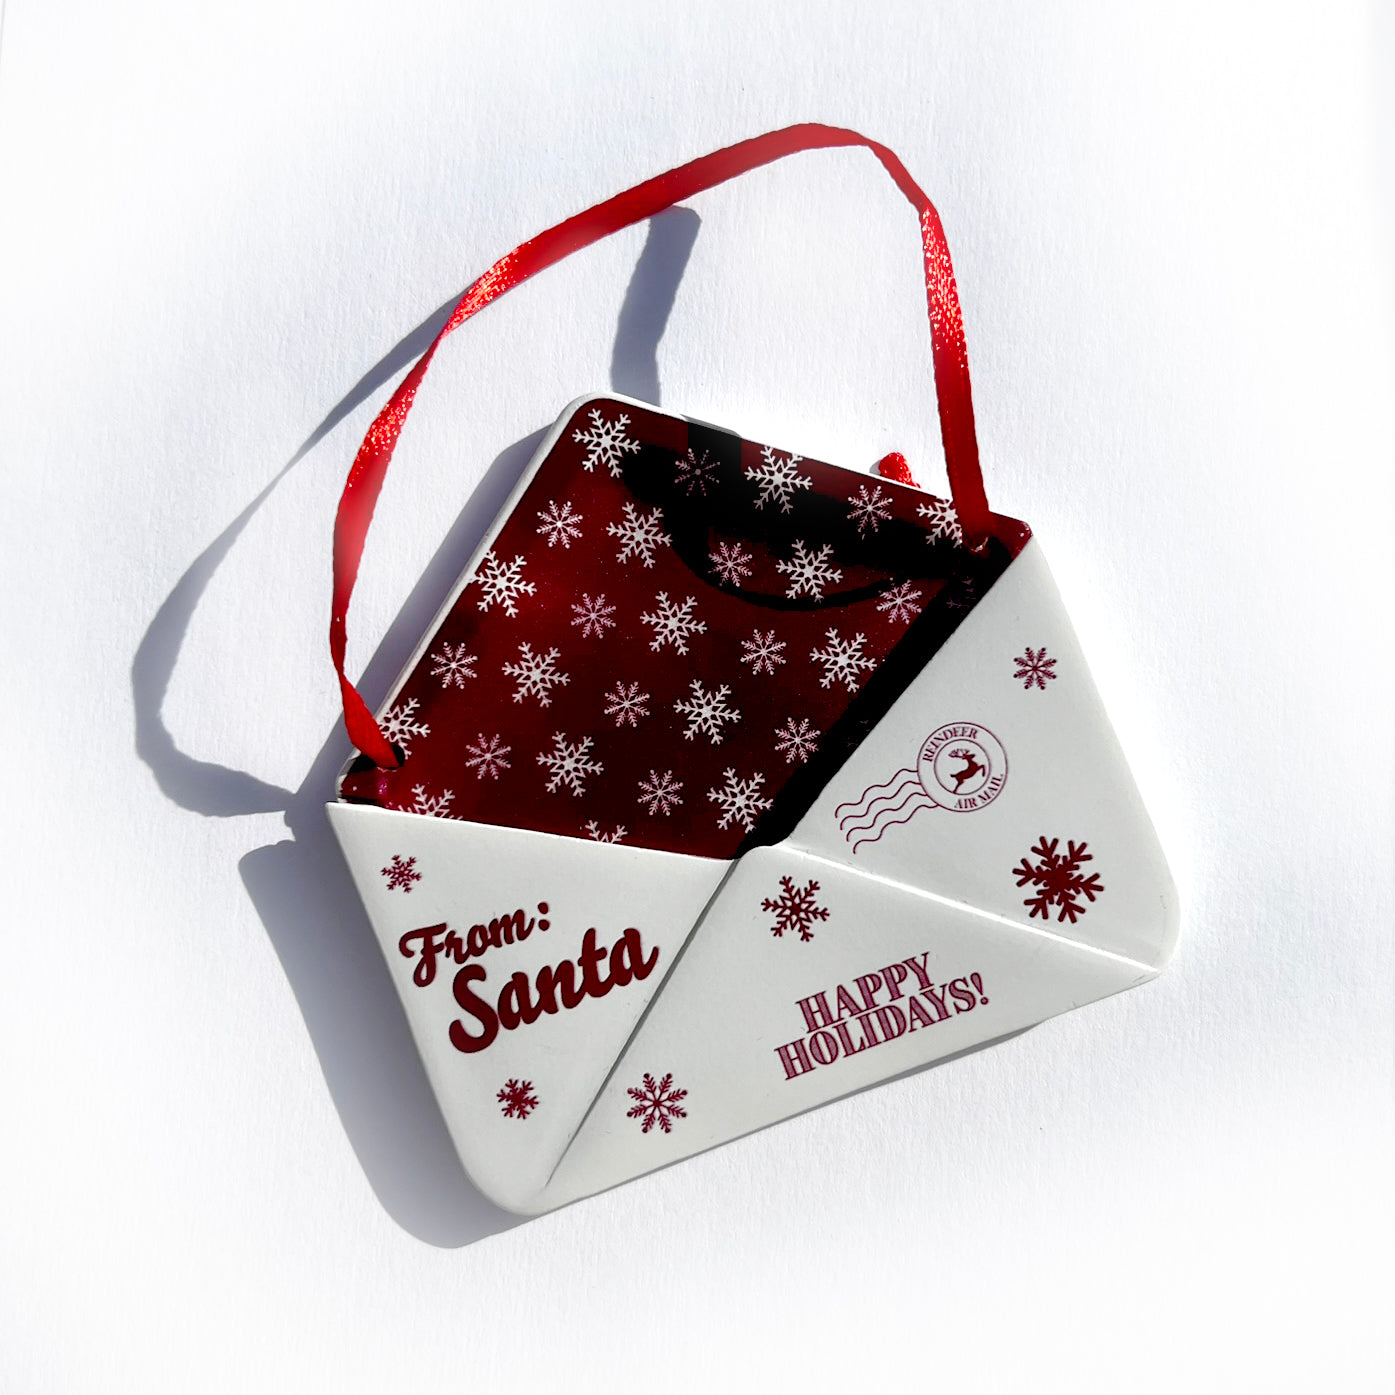 Christmas Collection (Note From Santa - Personalized) Maroon Snowflake Envelope Resin Ornament with Letter